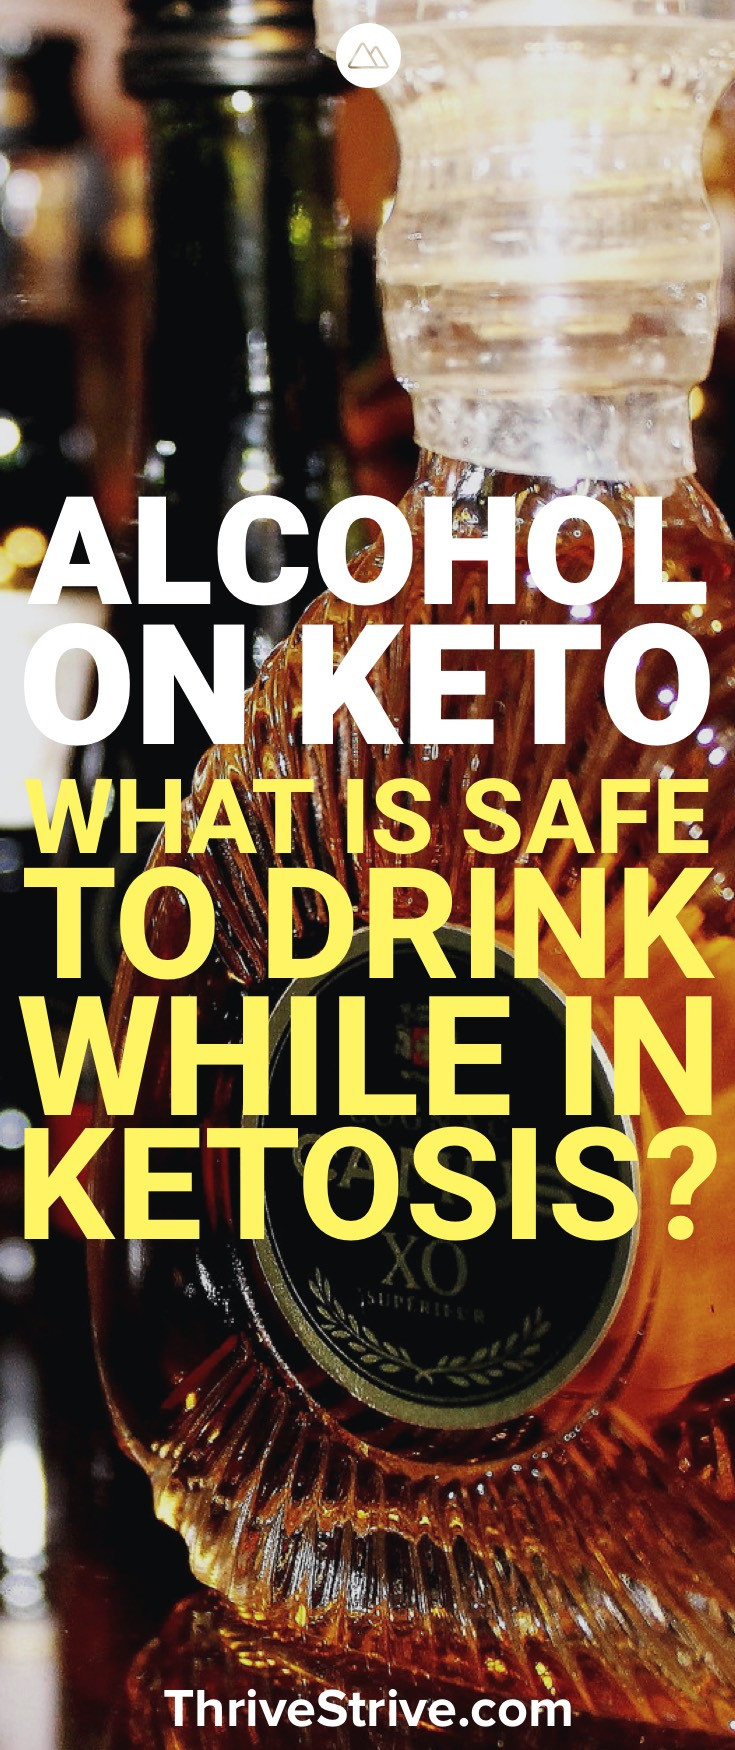 Keto Diet And Alcohol
 Alcohol on a Keto Diet What Is Safe to Drink While in